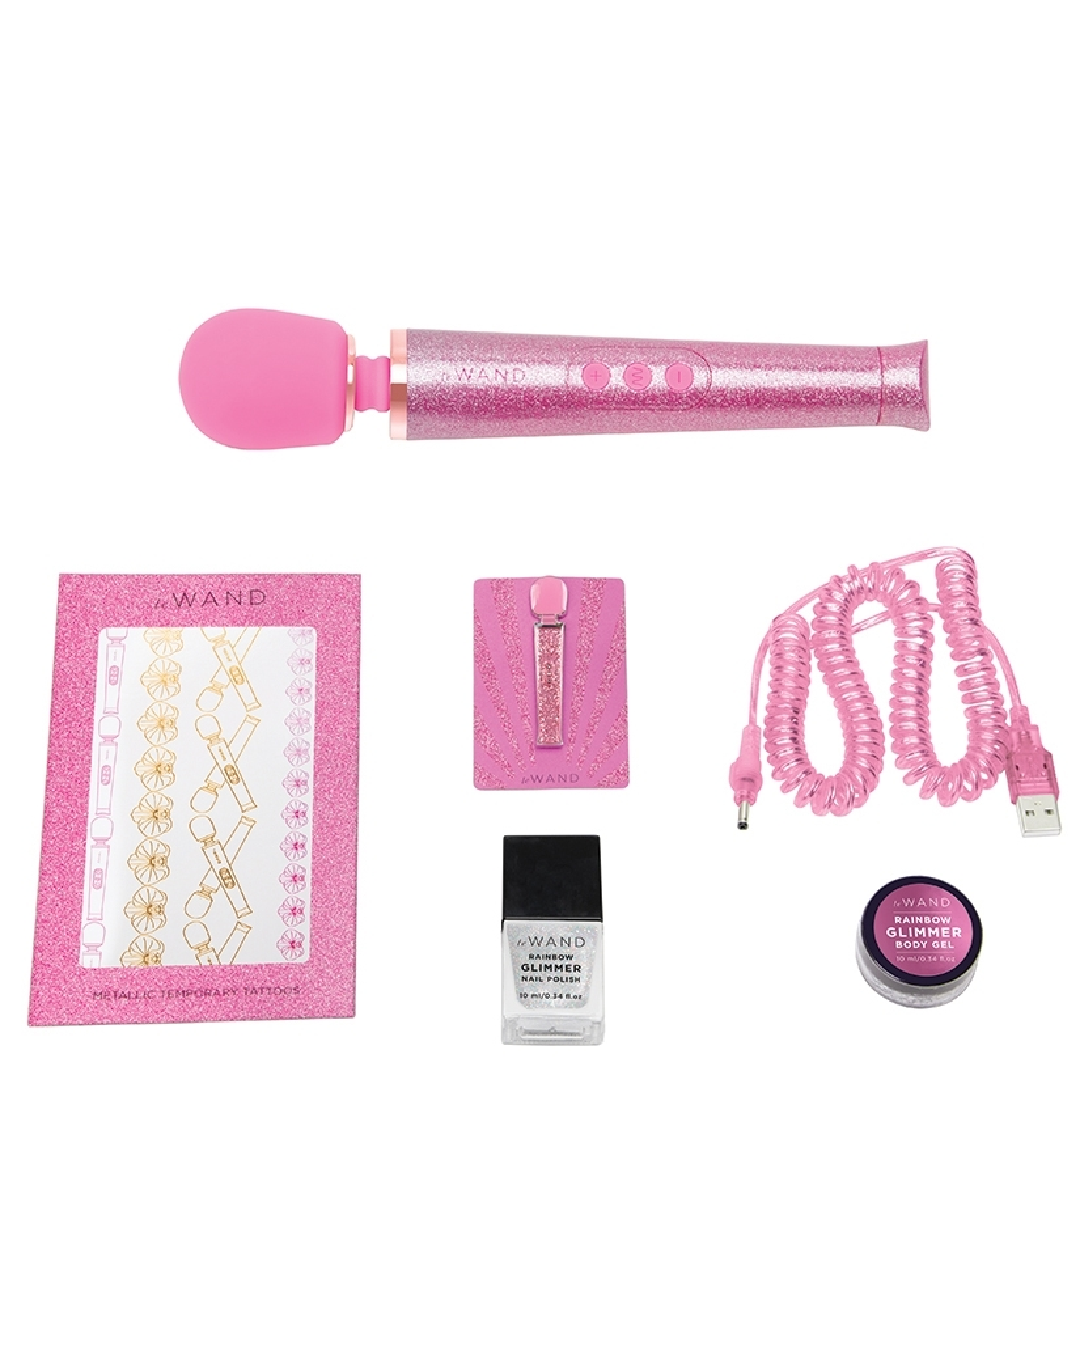 Le Wand All That Glimmers Wand Vibrator Set - Pink with wand, stickers, pink, glitter and charging cable 